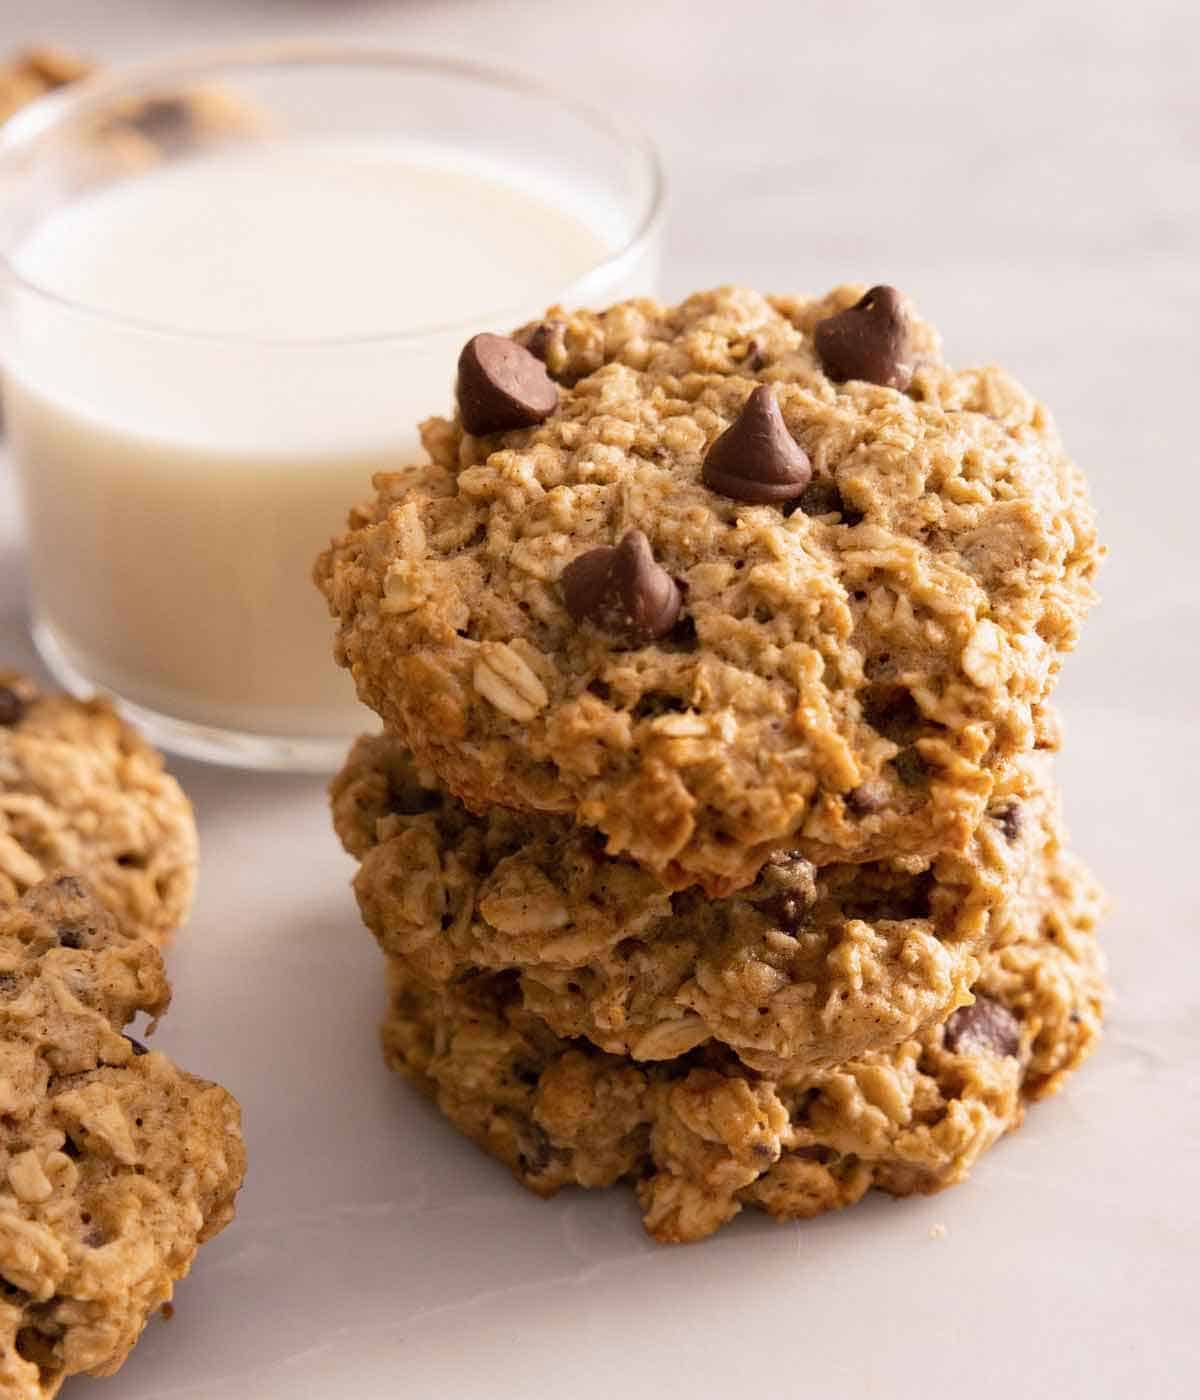 A stack of three banana oatmeal cookies by a glass of milk.